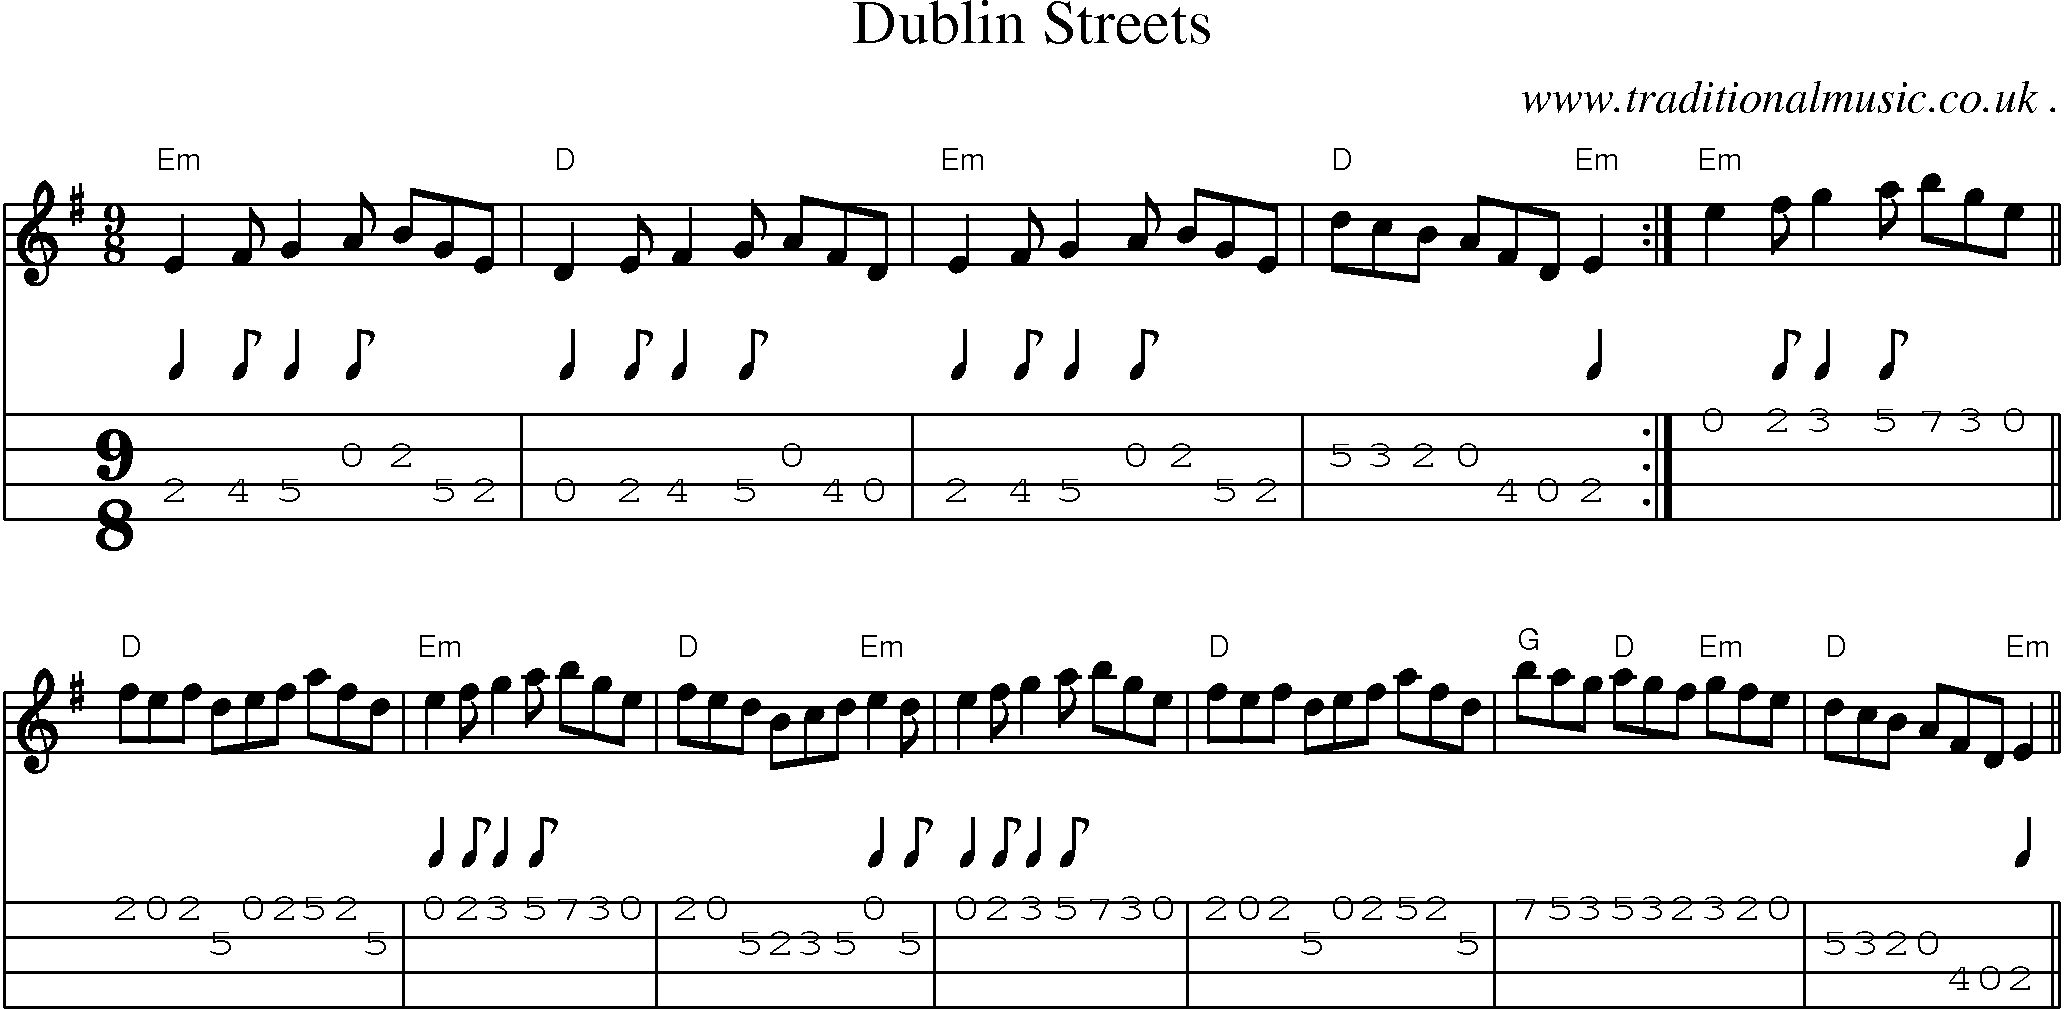 Music Score and Guitar Tabs for Dublin Streets